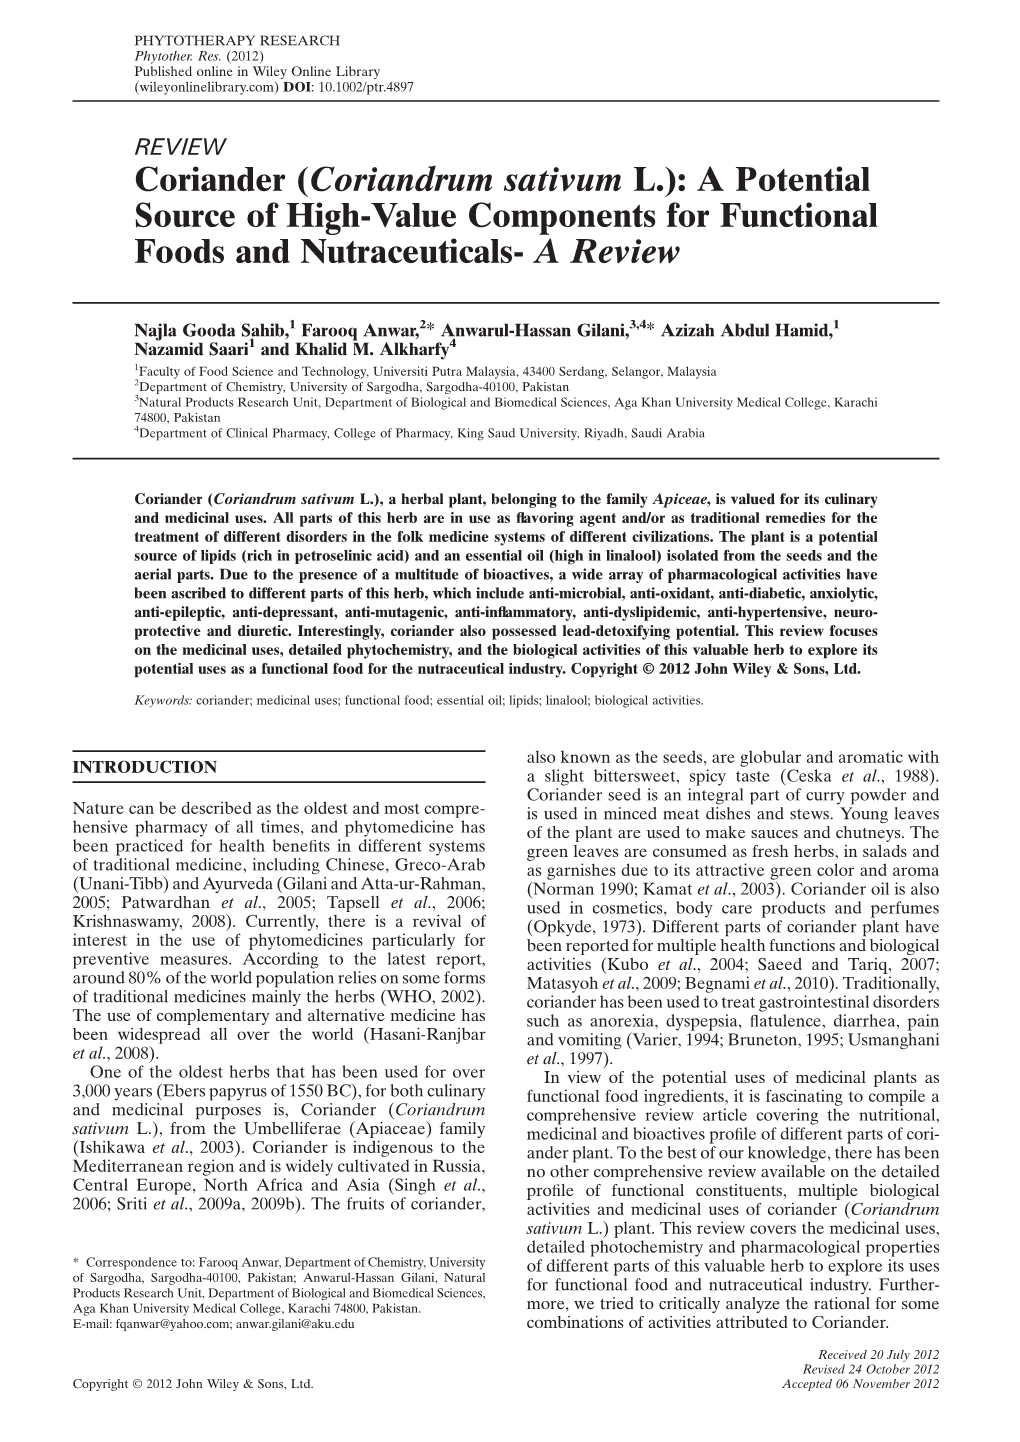 Coriander (Coriandrum Sativum L.): a Potential Source of Highvalue Components for Functional Foods and Nutraceuticals a Review